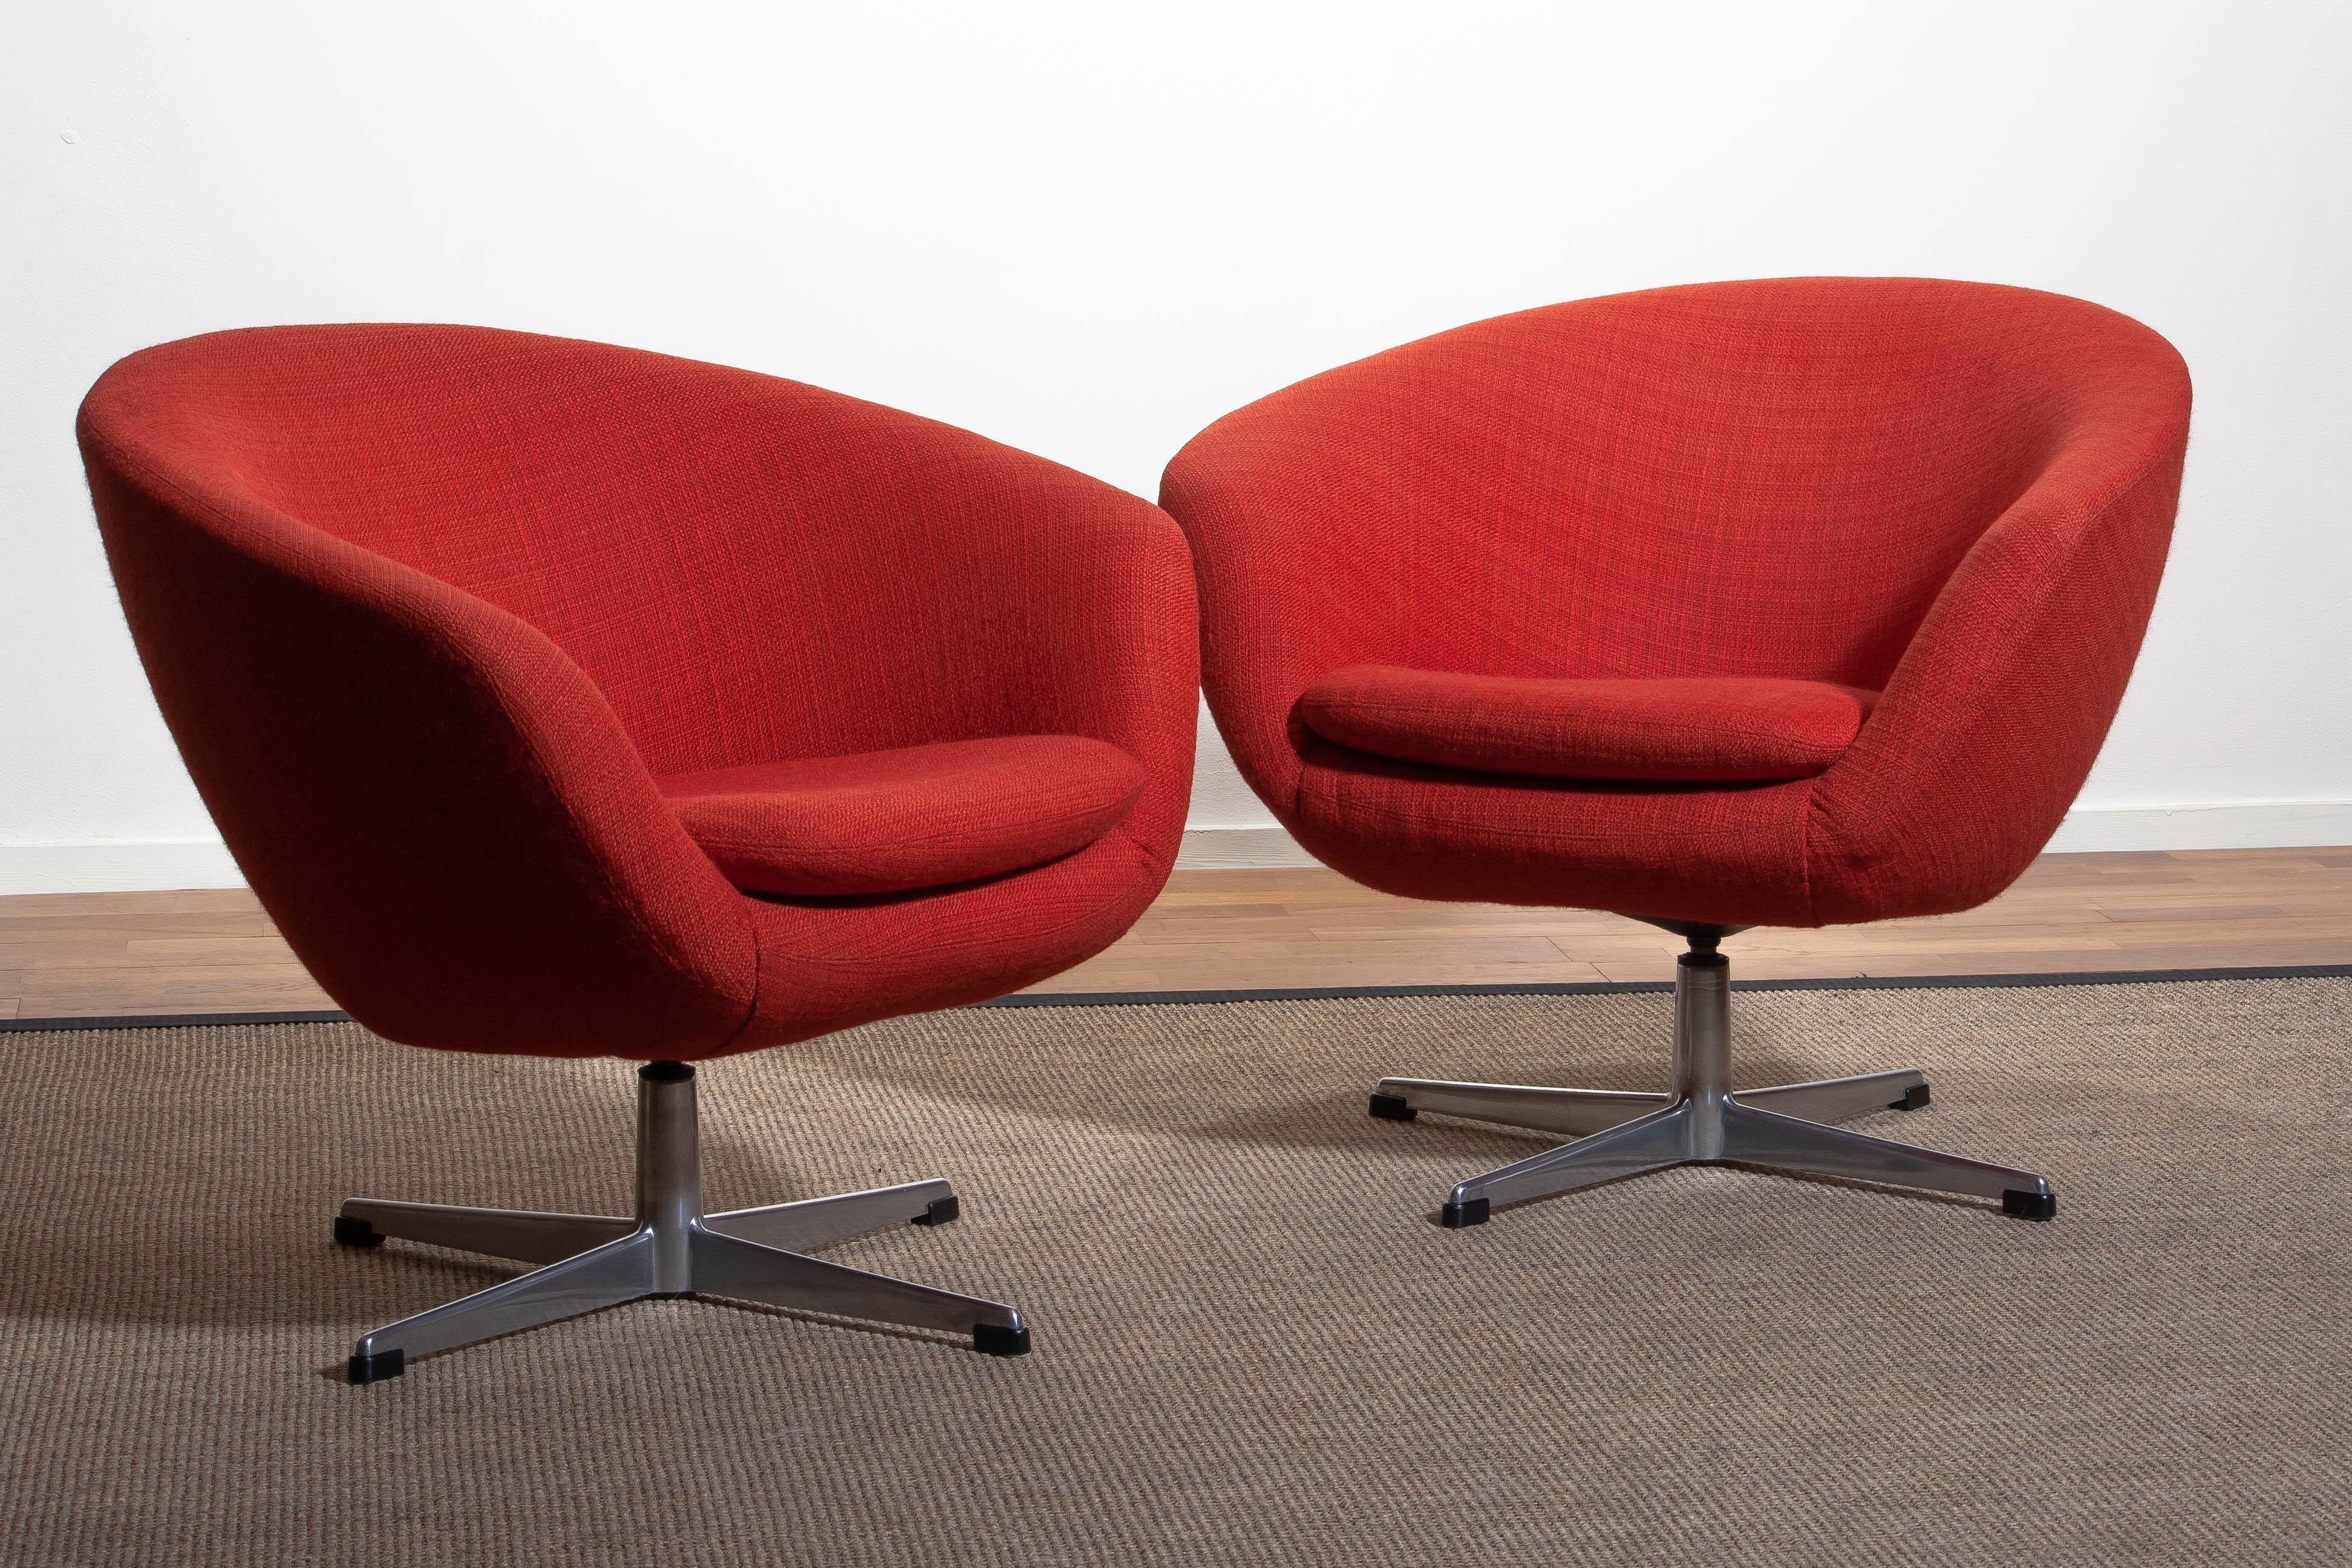 1960s, Pair of Swivel Lounge Chairs by Carl Eric Klote for Overman, Denmark 1